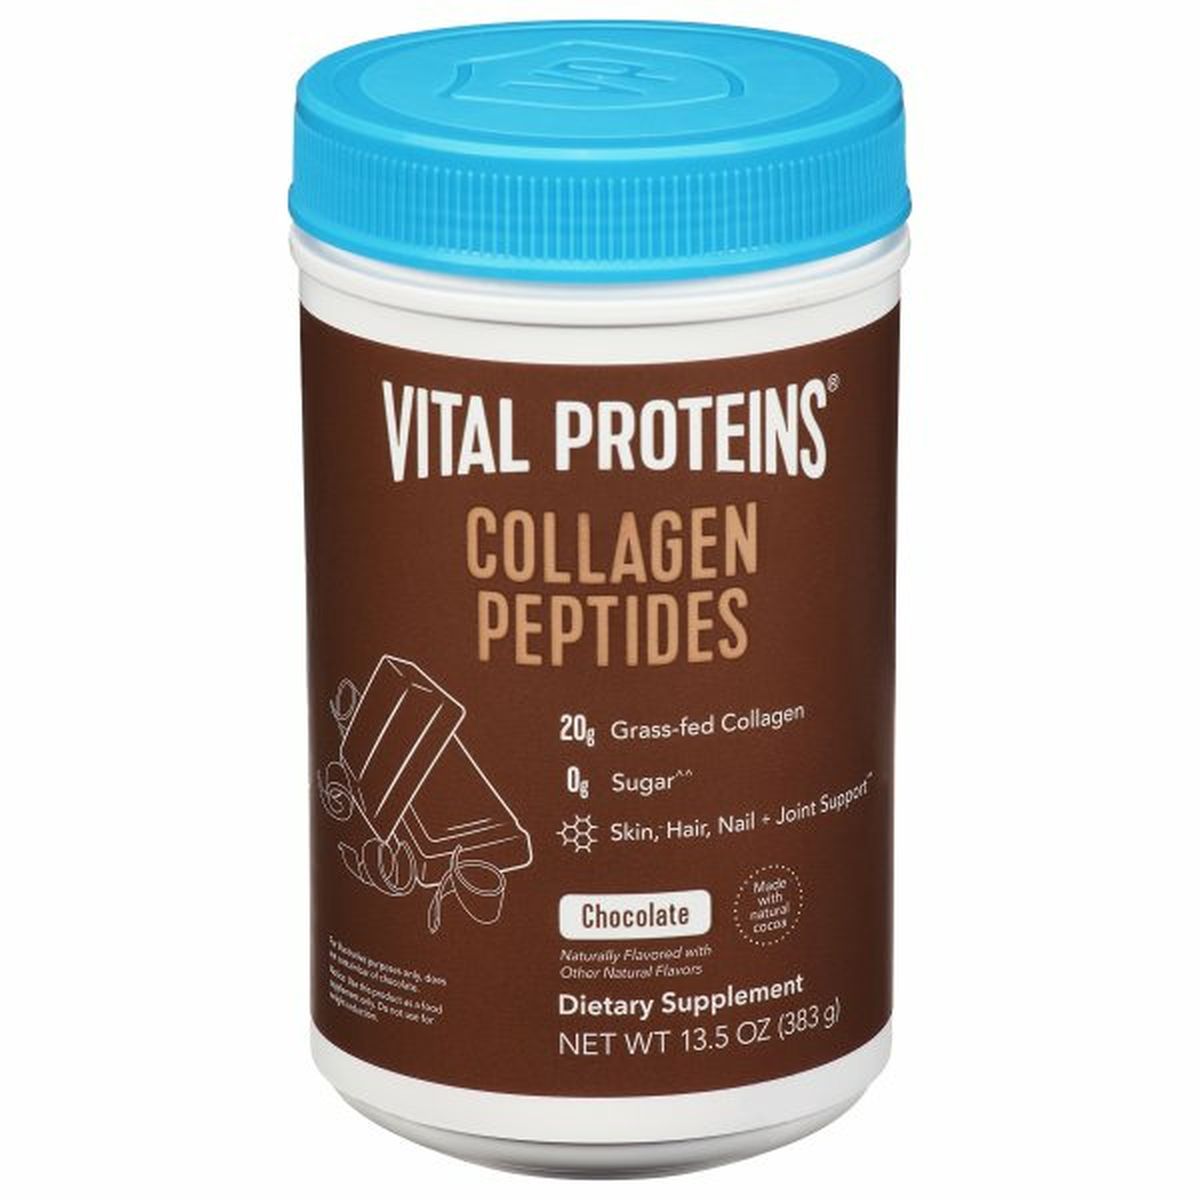 Calories in Vital Proteins Collagen Peptides, Chocolate